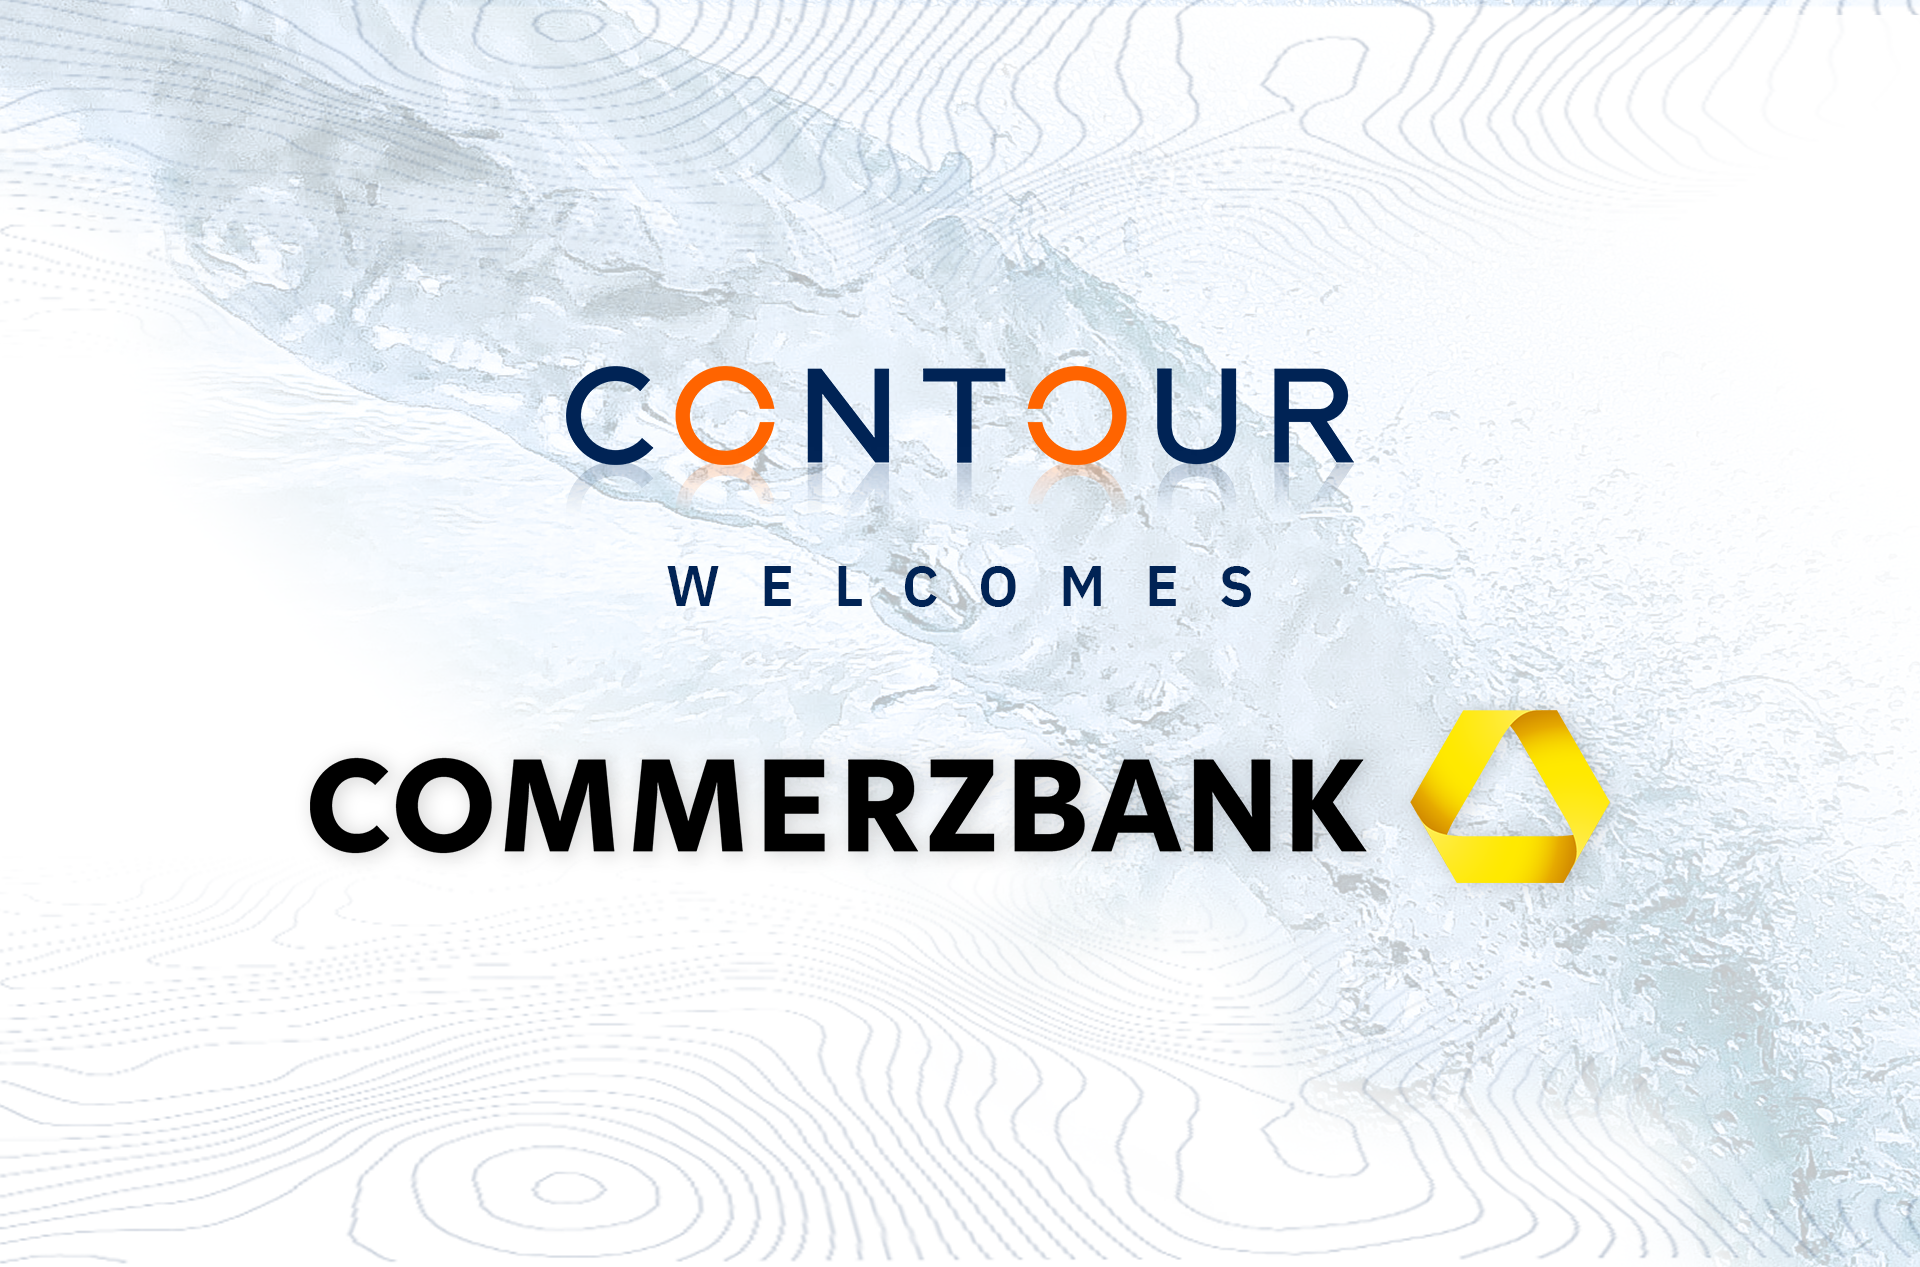 Contour strengthens its global network with the inclusion of Commerzbank to its digital trade finance network